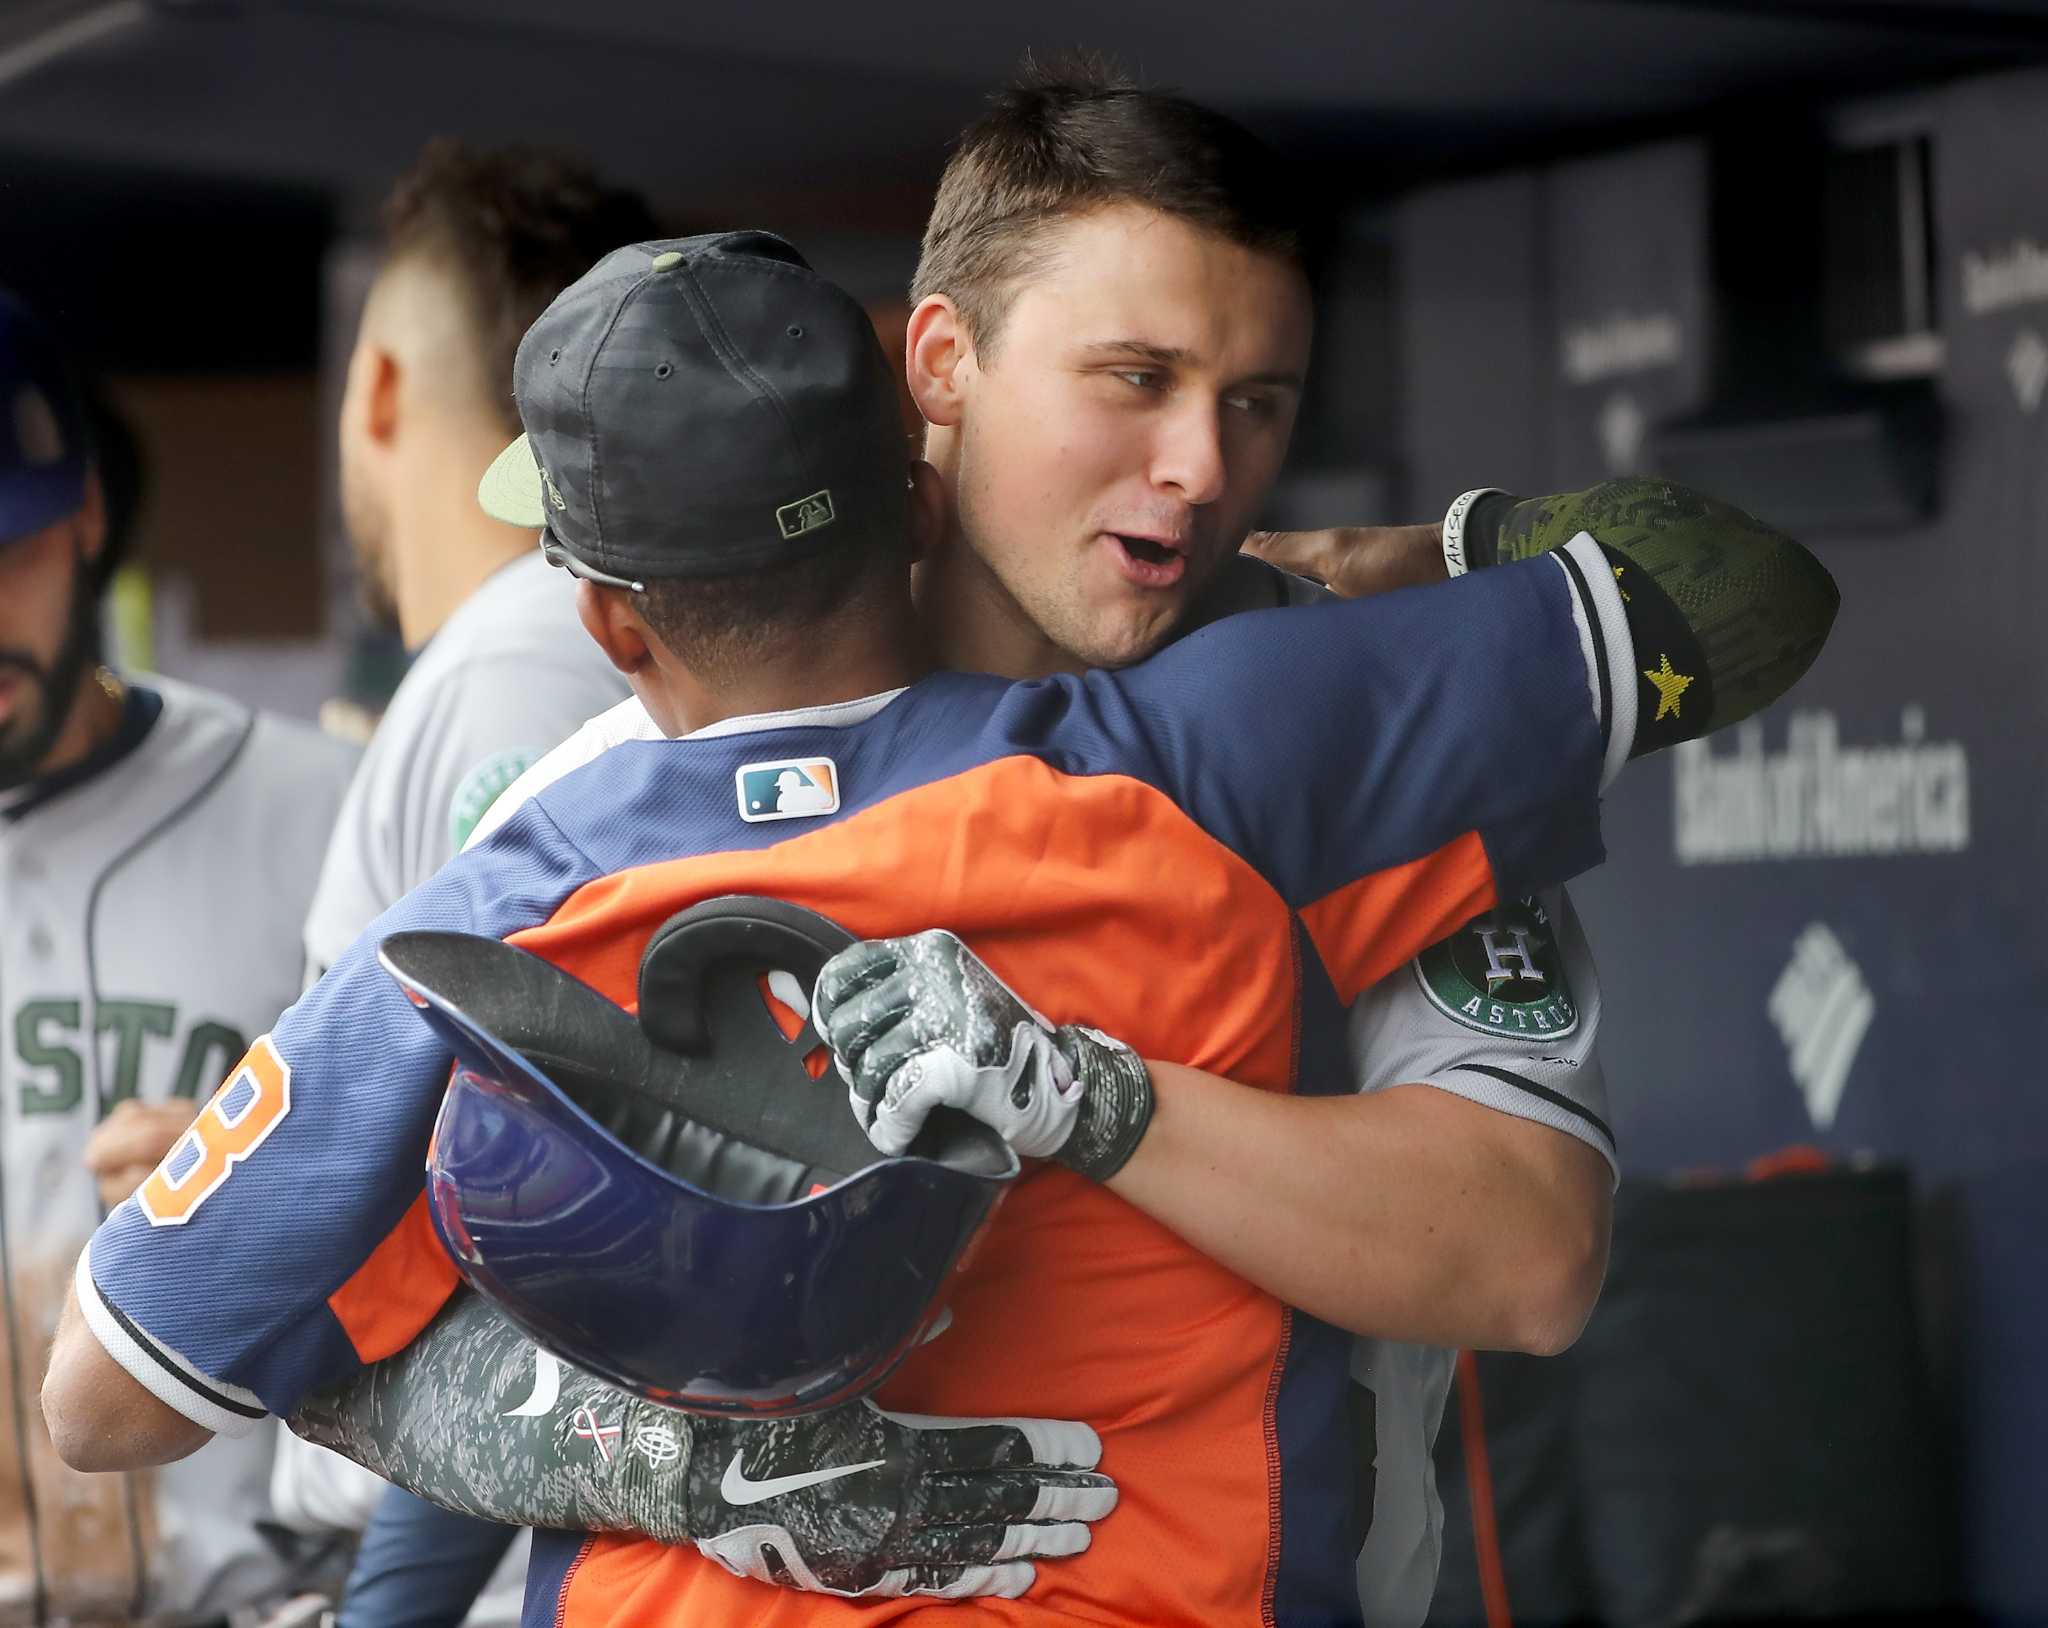 'Hugs for homers' becoming an Astros' dugout tradition - Houston Chronicle